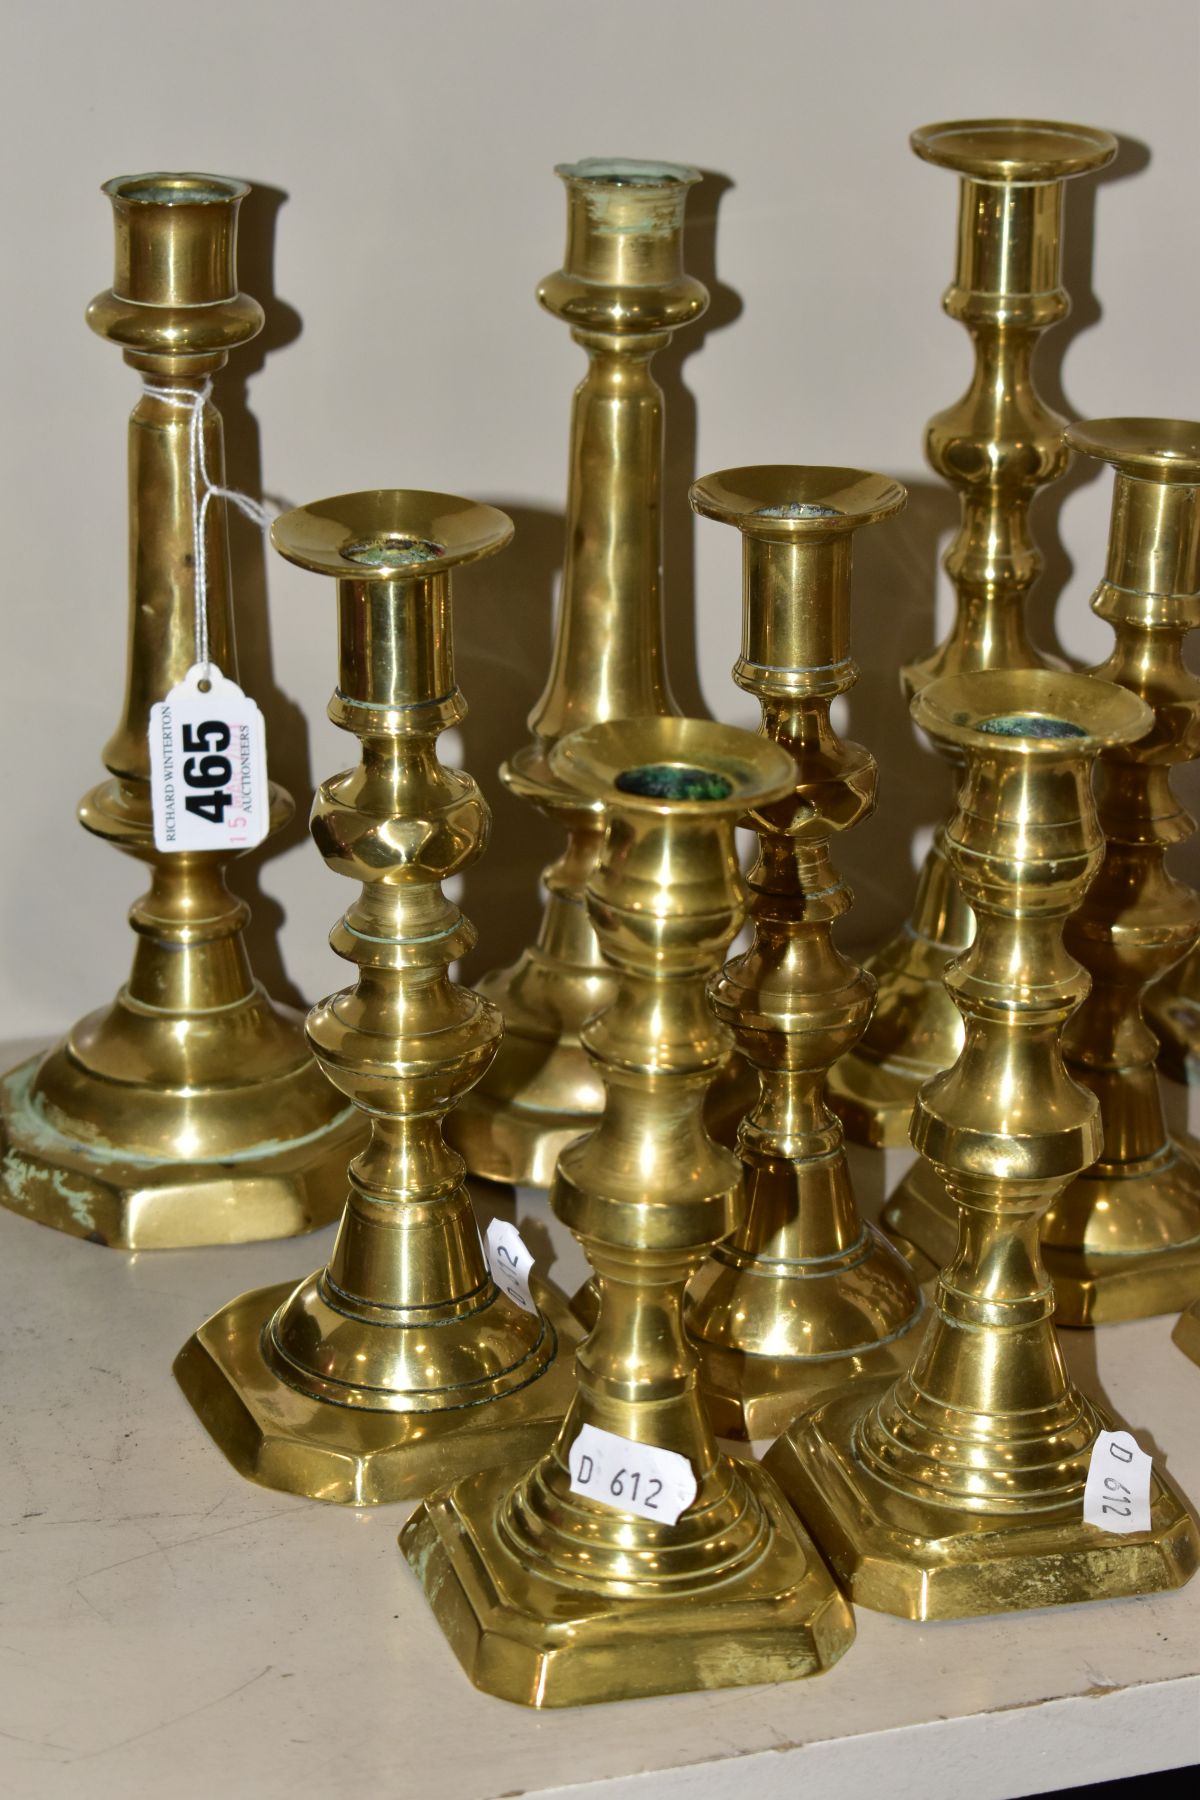 SIX PAIRS OF BRASS CANDLESTICKS, tallest height 22cm and smallest height 16cm, all fitted with - Image 2 of 5